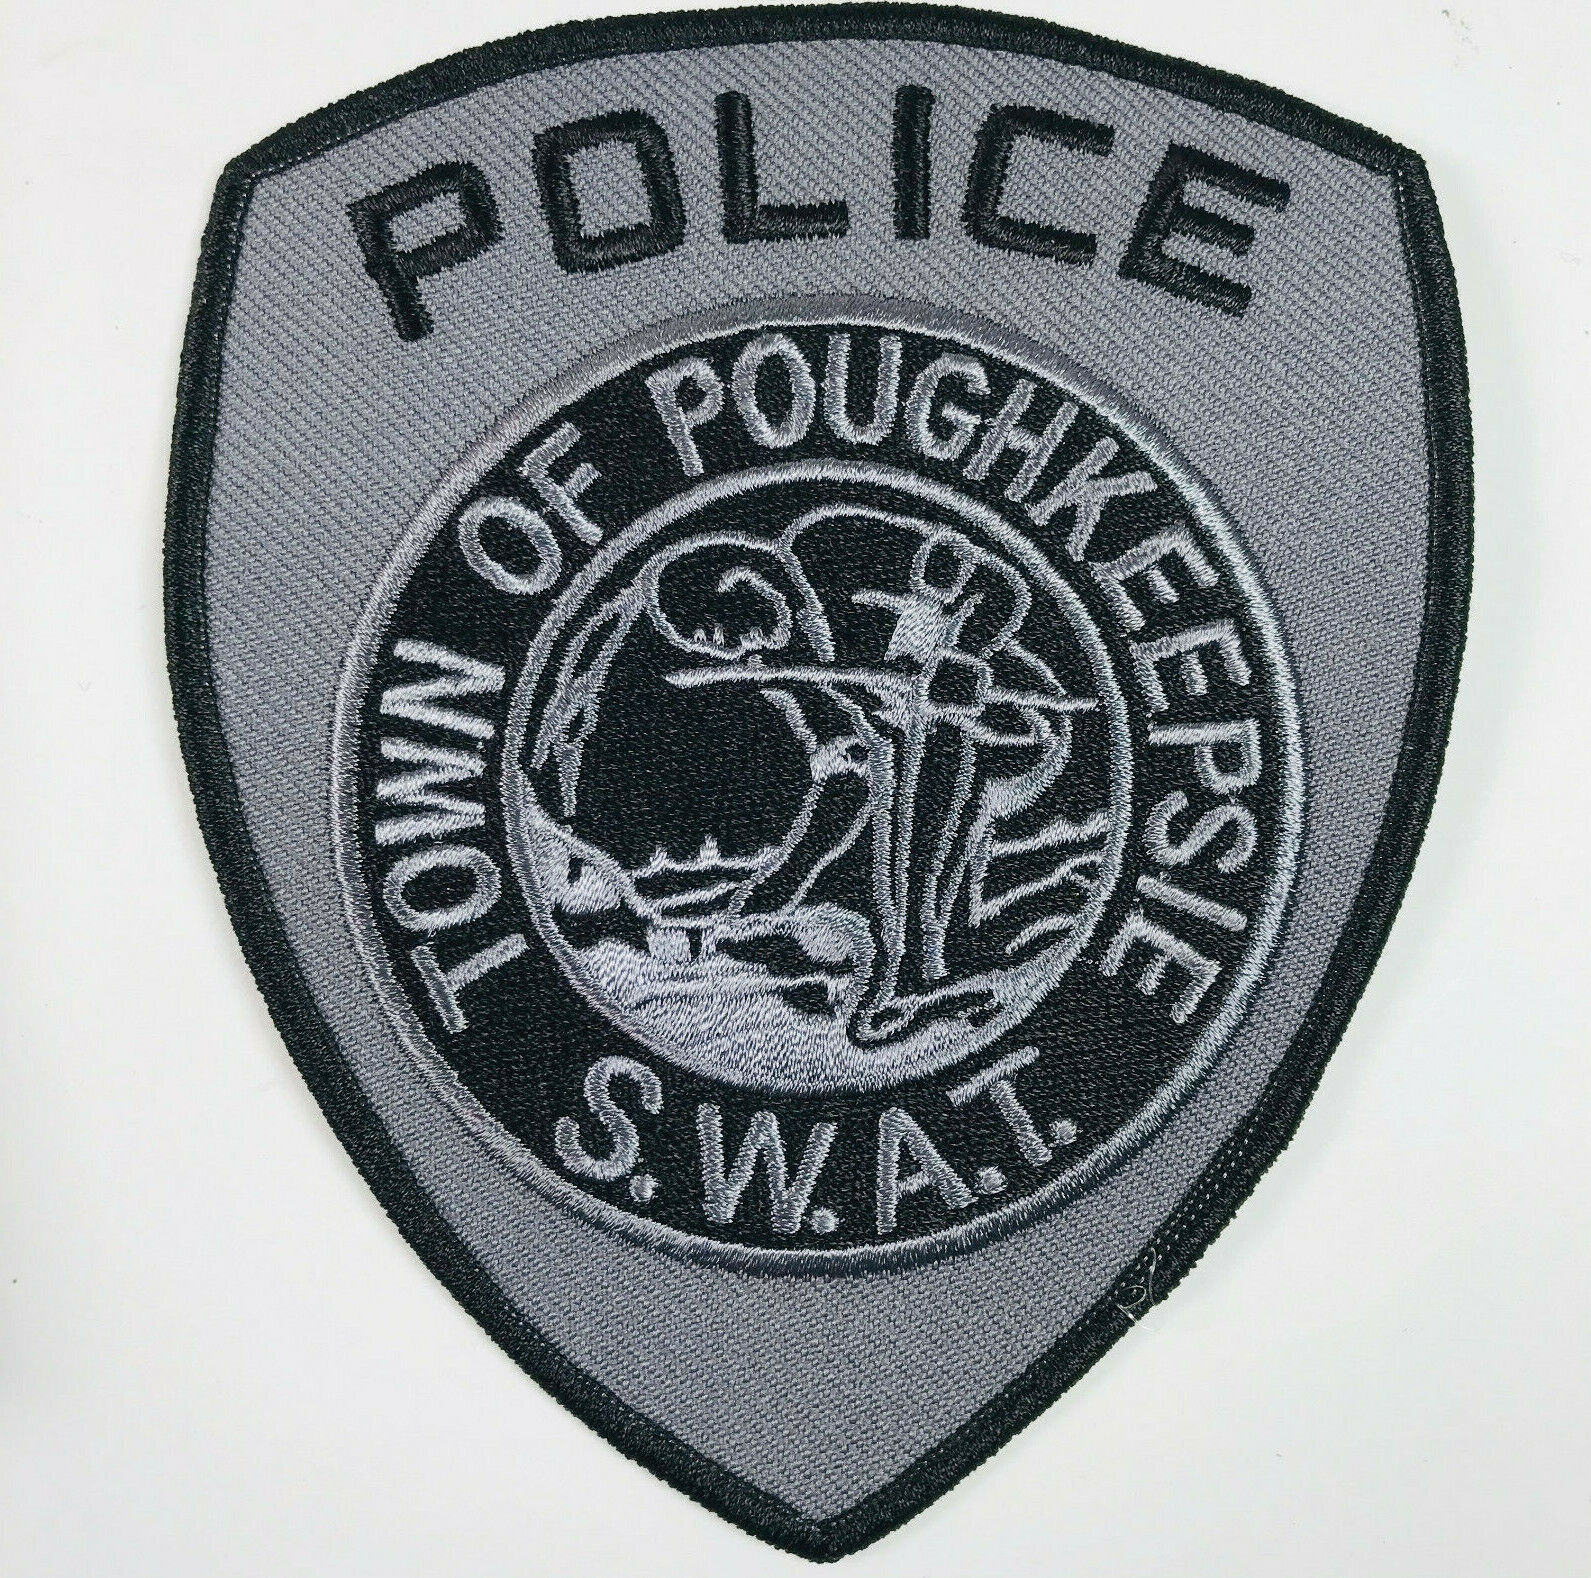 Poughkeepsie SWAT Police New York NY Subdued Tactical Patch B5